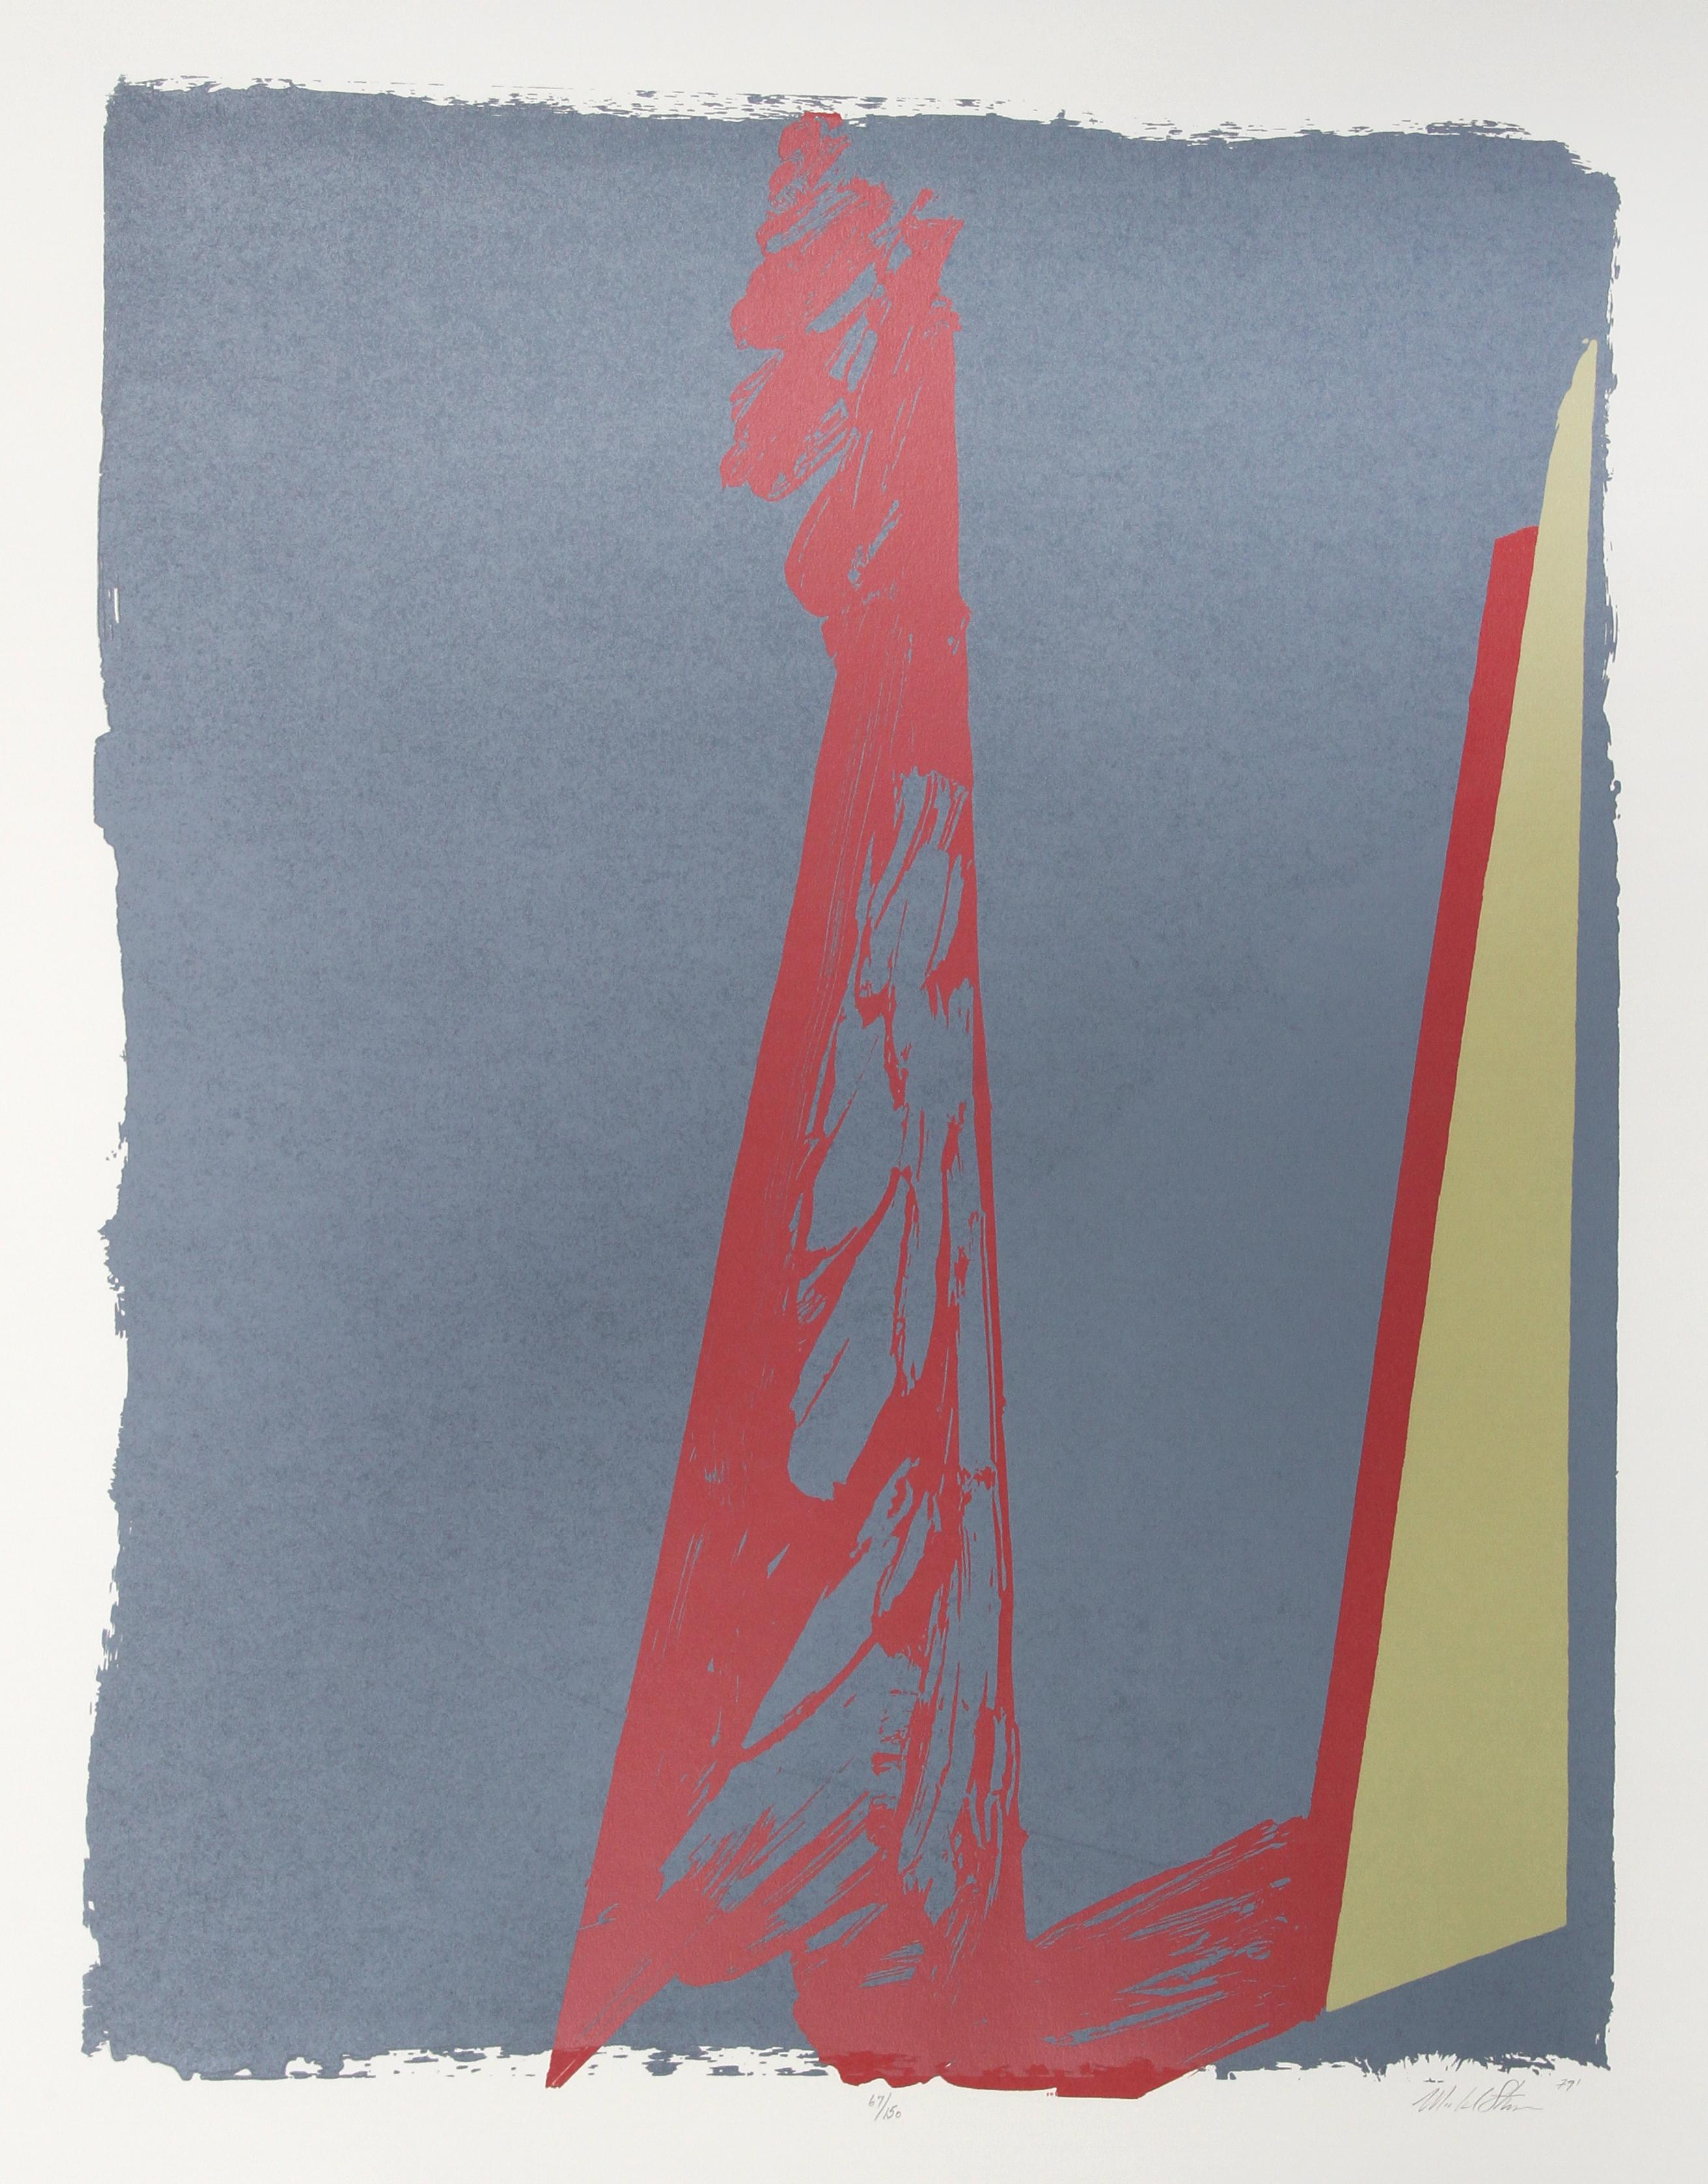 Abstract expressionist print by American artist Michael Steiner, who is most commonly known for his large scale sculptures. 

Oxos II
Michael Steiner, American (1945)
Date: 1979
Screenprint, Signed and Numbered in Pencil
Edition of 150
Size: 50 in.